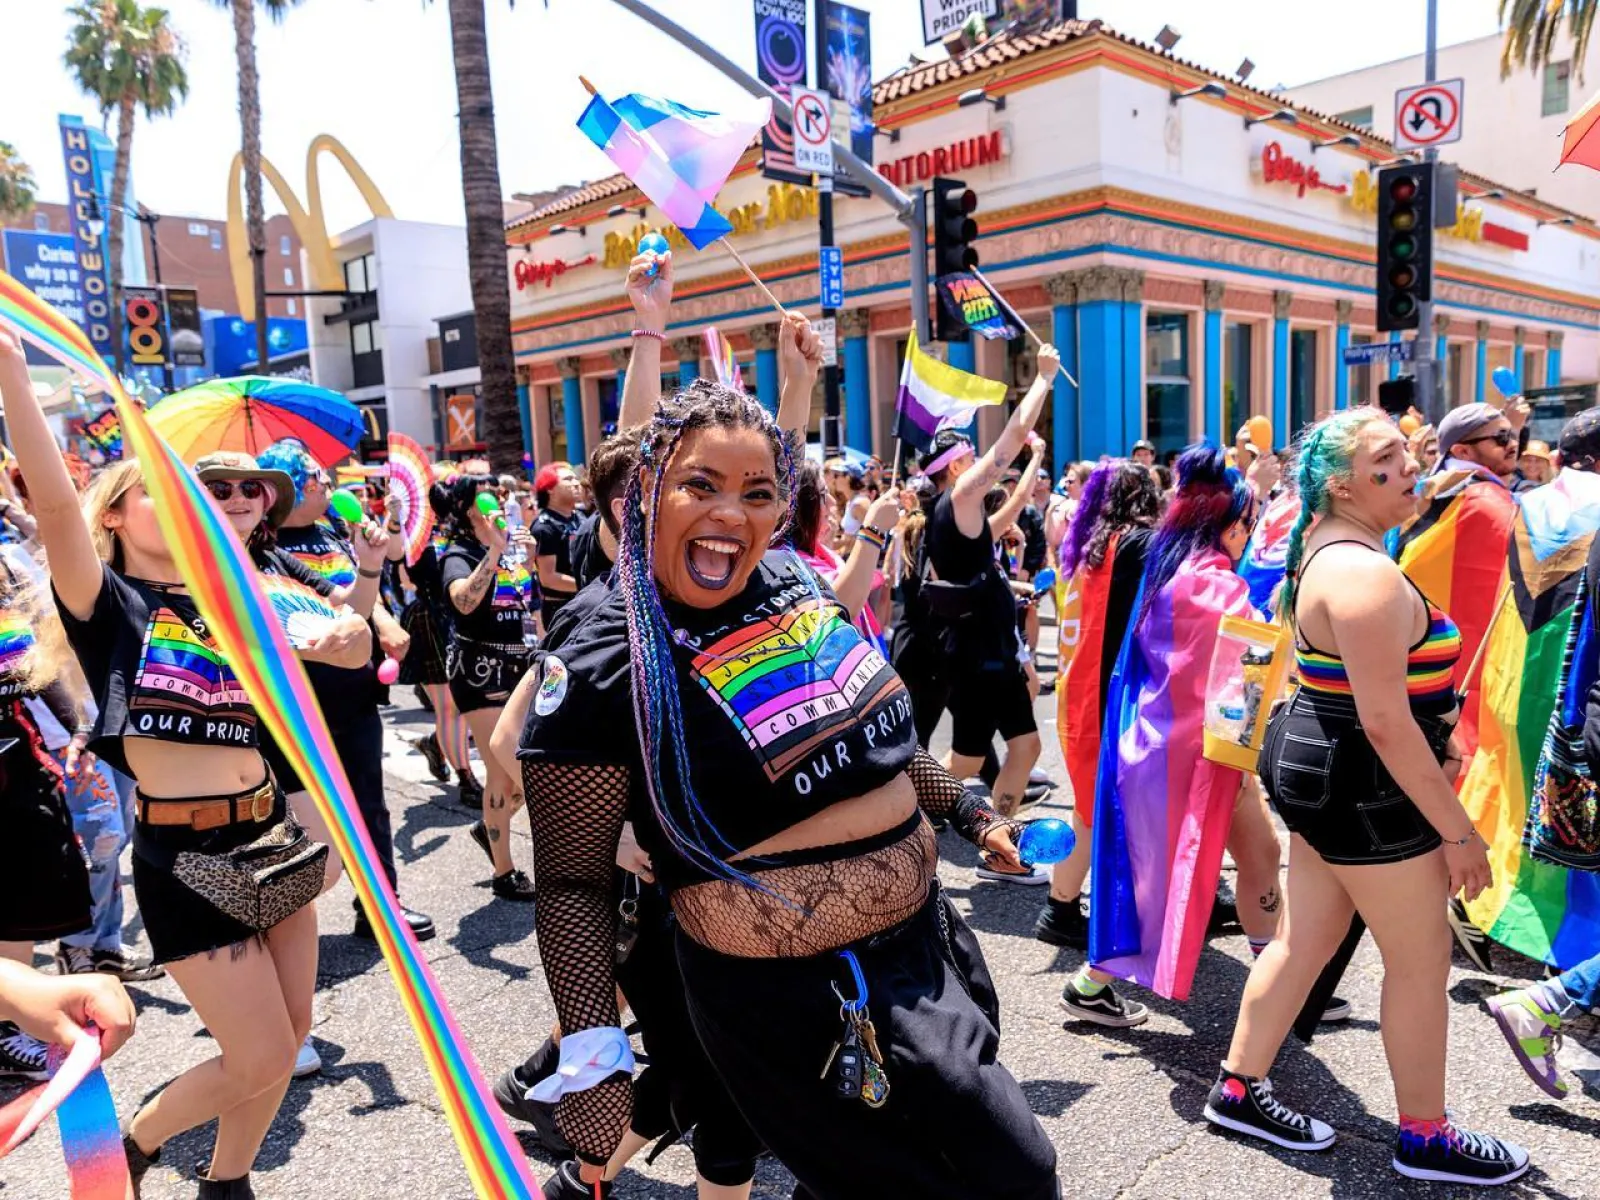 Pride Vibes is back for 2023 and it's bigger than ever as it